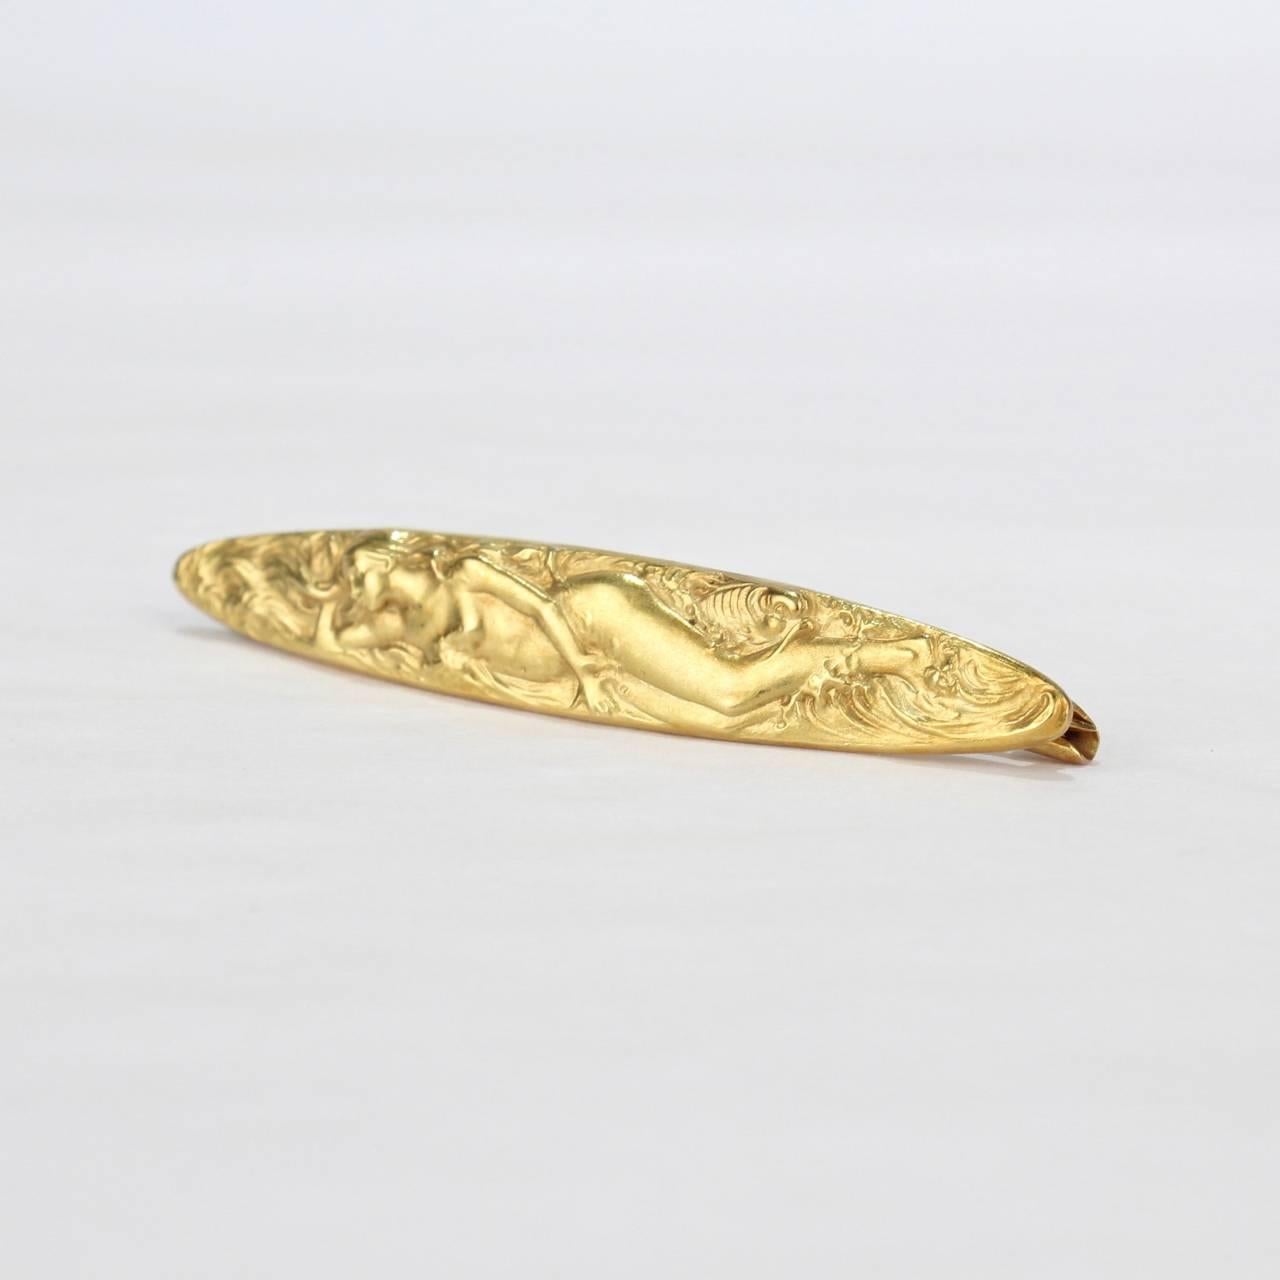 A fine signed Kremnetz 14-karat gold American Art Nouveau period pin or brooch. 

Of horizontal lozenge form with a finely worked repousse reclining nude. She appears to be in a dream (possibly an allegory to sleep or a depiction of a Venus) and